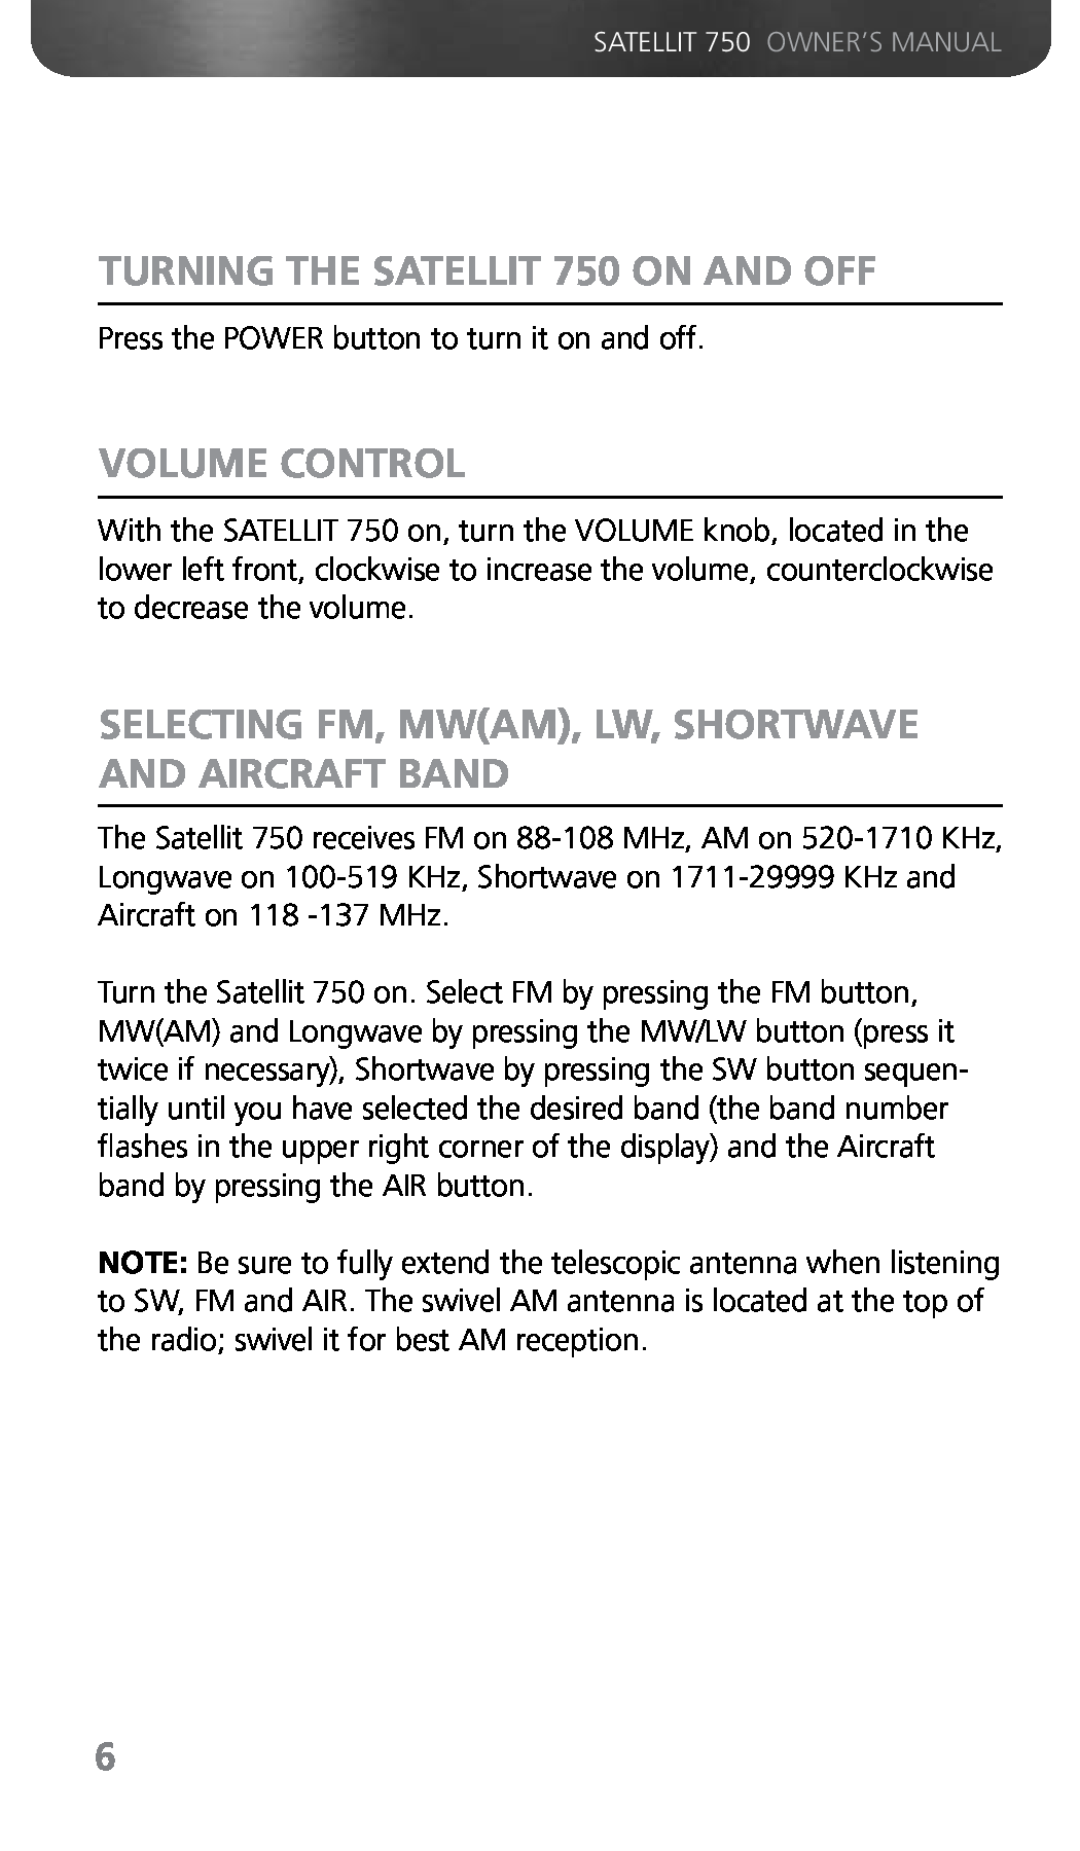 Grundig owner manual TURNING THE SATELLIT 750 ON AND OFF, Volume Control 